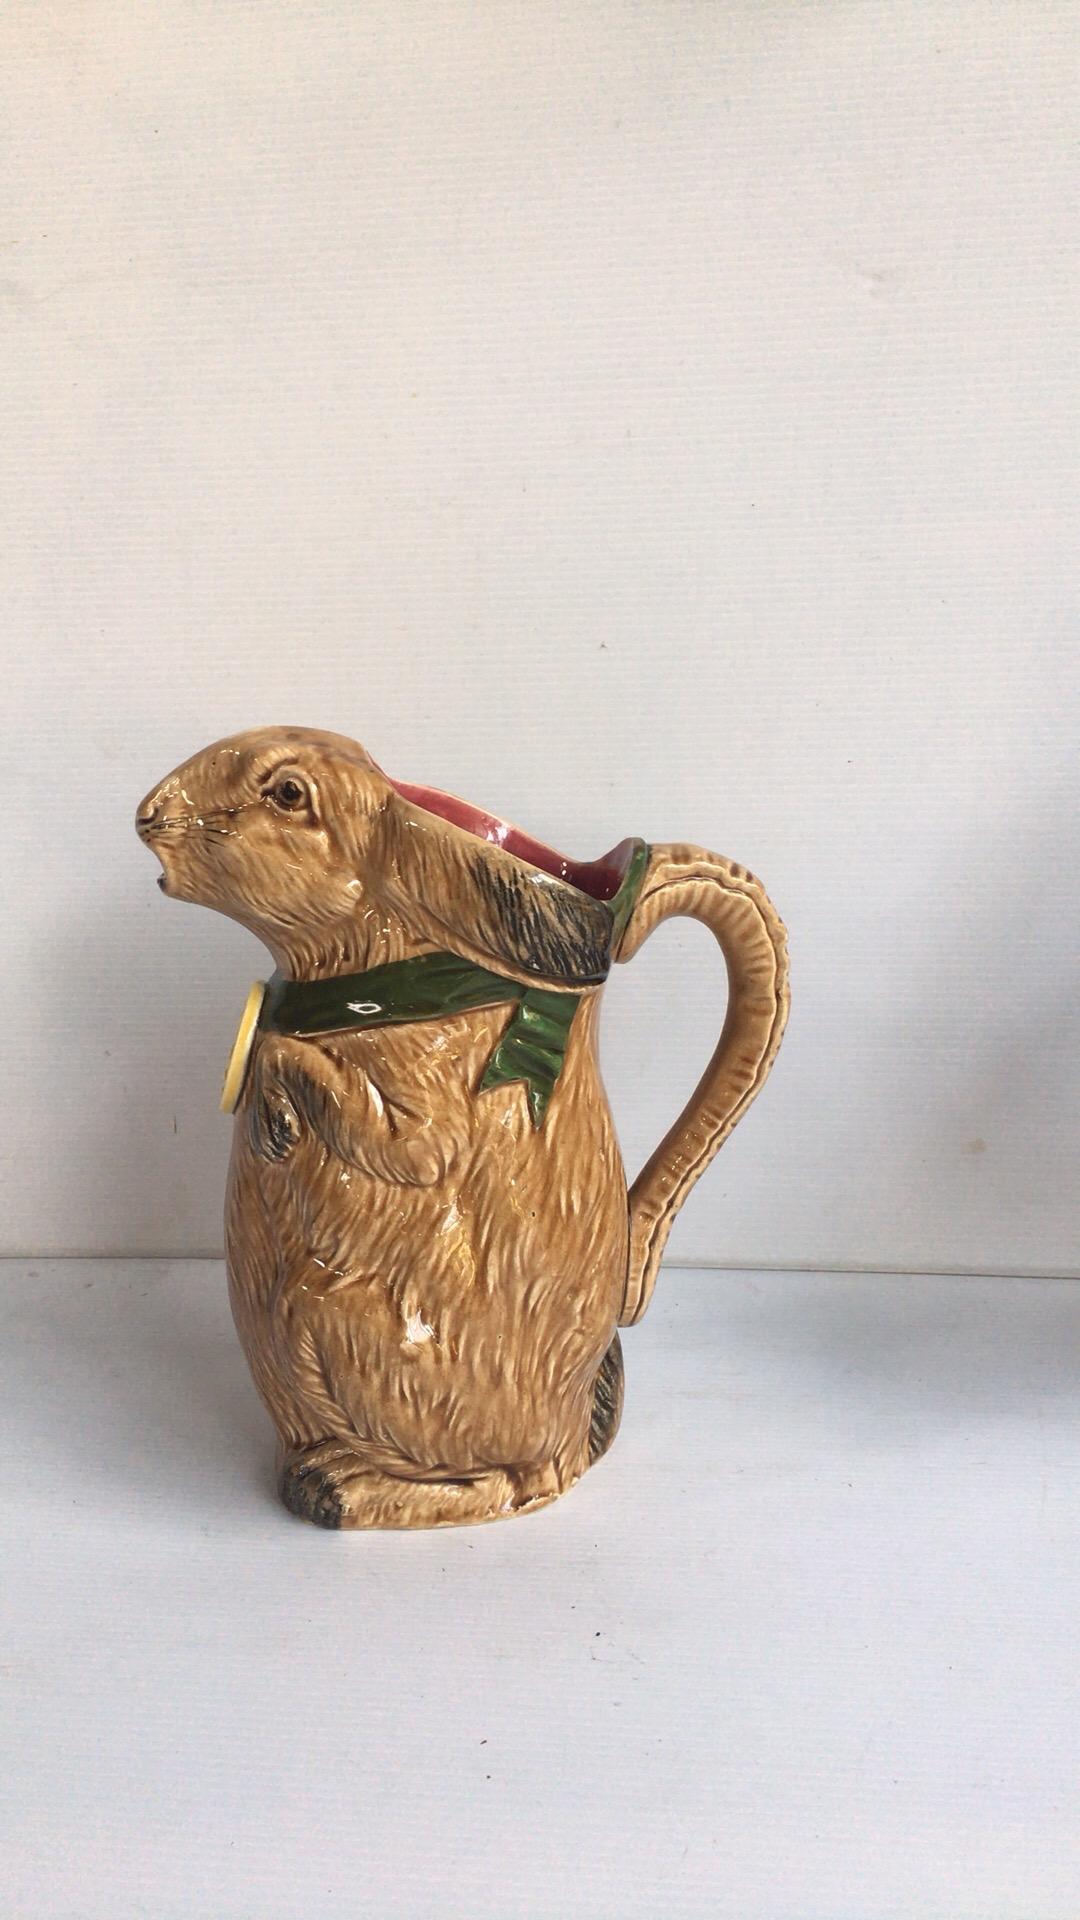 French Majolica pitcher beige rabbit with a medal 1900, made for the International Exhibition in Paris of 1900.
The pitcher is stamped by the store where he was sold Compagnie Franco Anglaise 78 rue de turbigo in Paris.